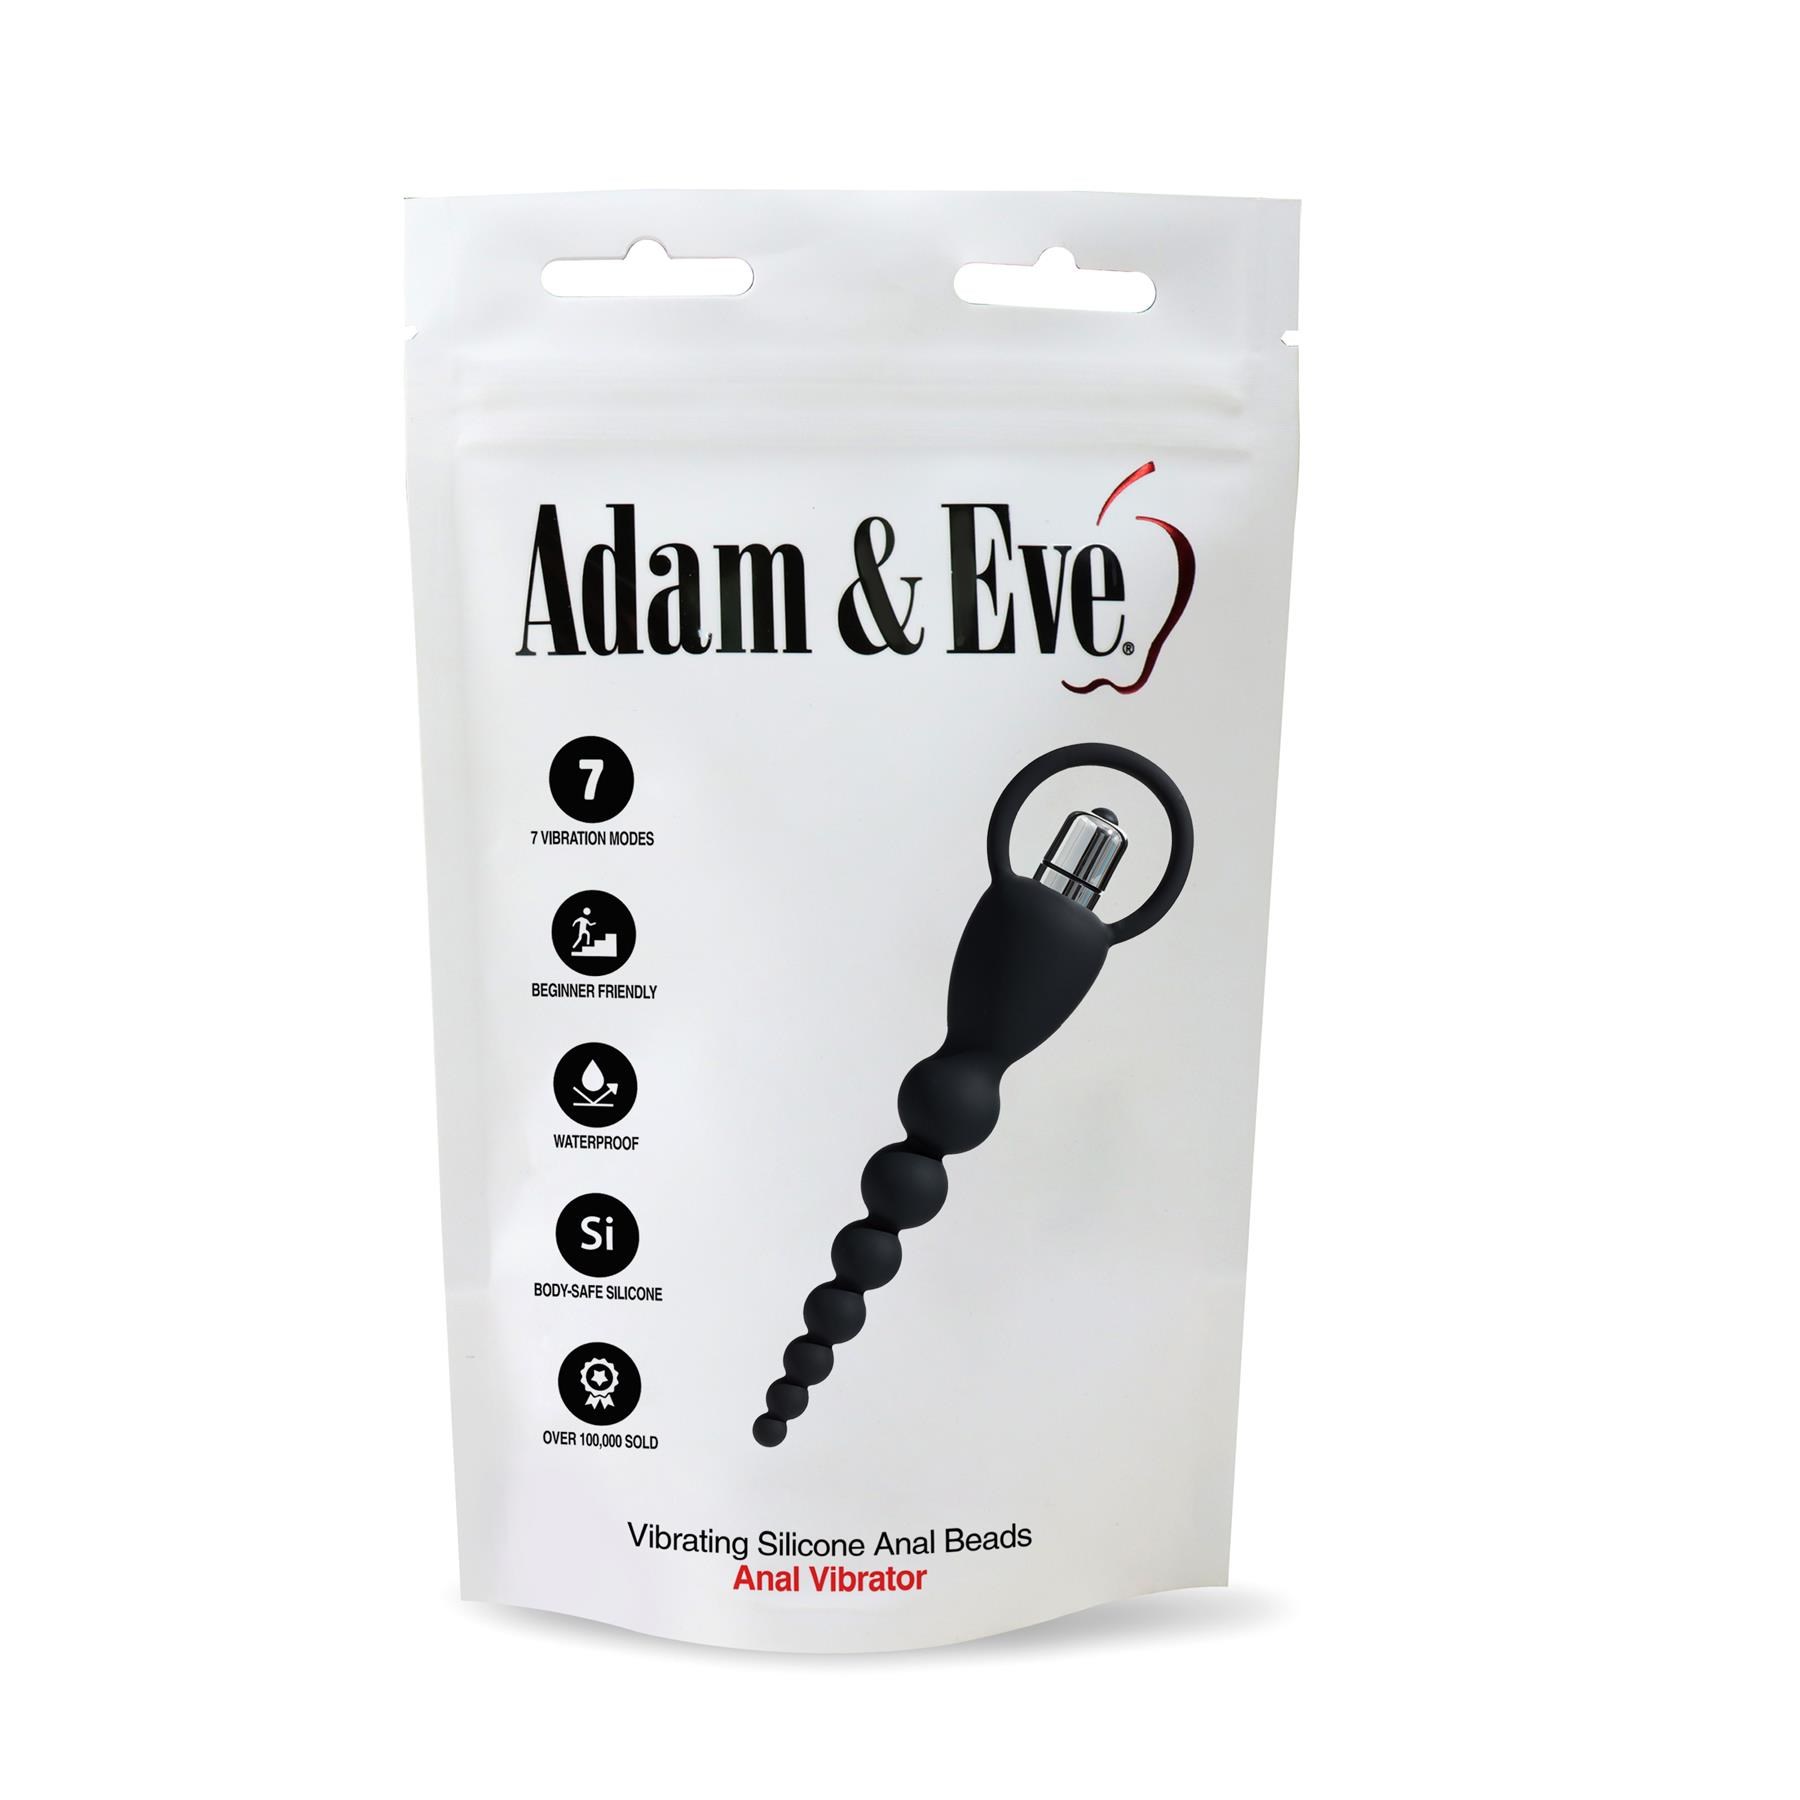 Adam & Eve Vibrating Silicone Anal Beads - Packaging Front